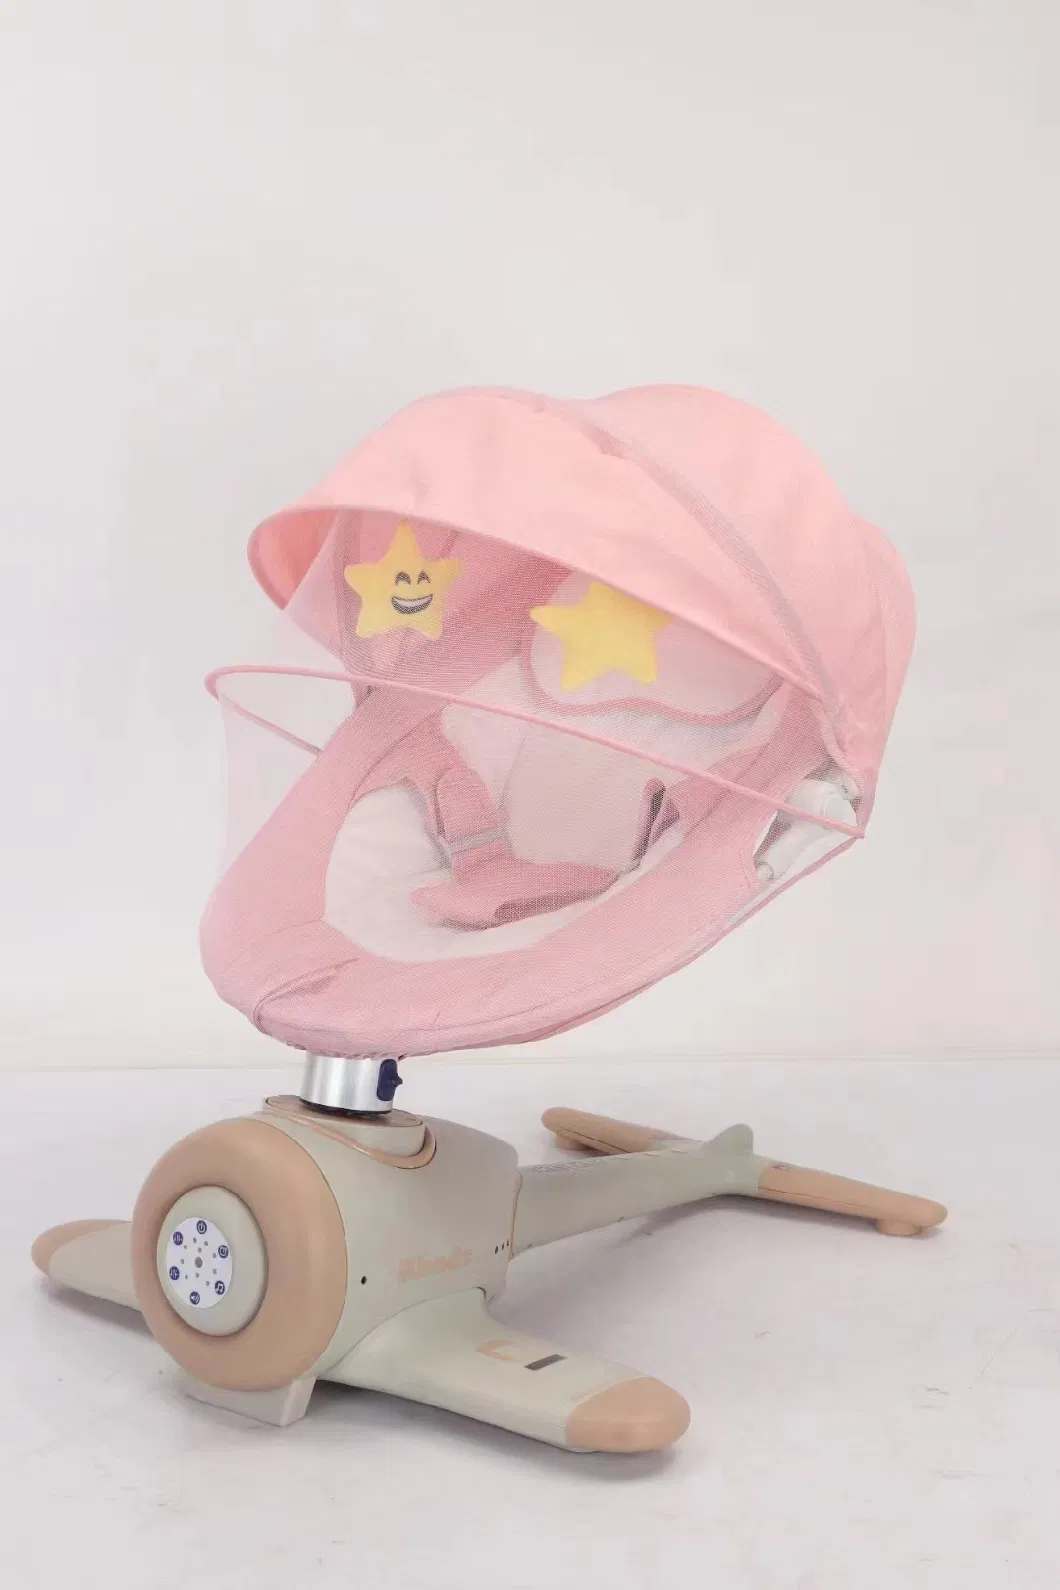 2023 3 in 1 Electric Portable Modern Indoor Baby Sleeping Chair Toys Automatic Baby Eggshell Rocker Bouncer Swing Cradle Chair with Music